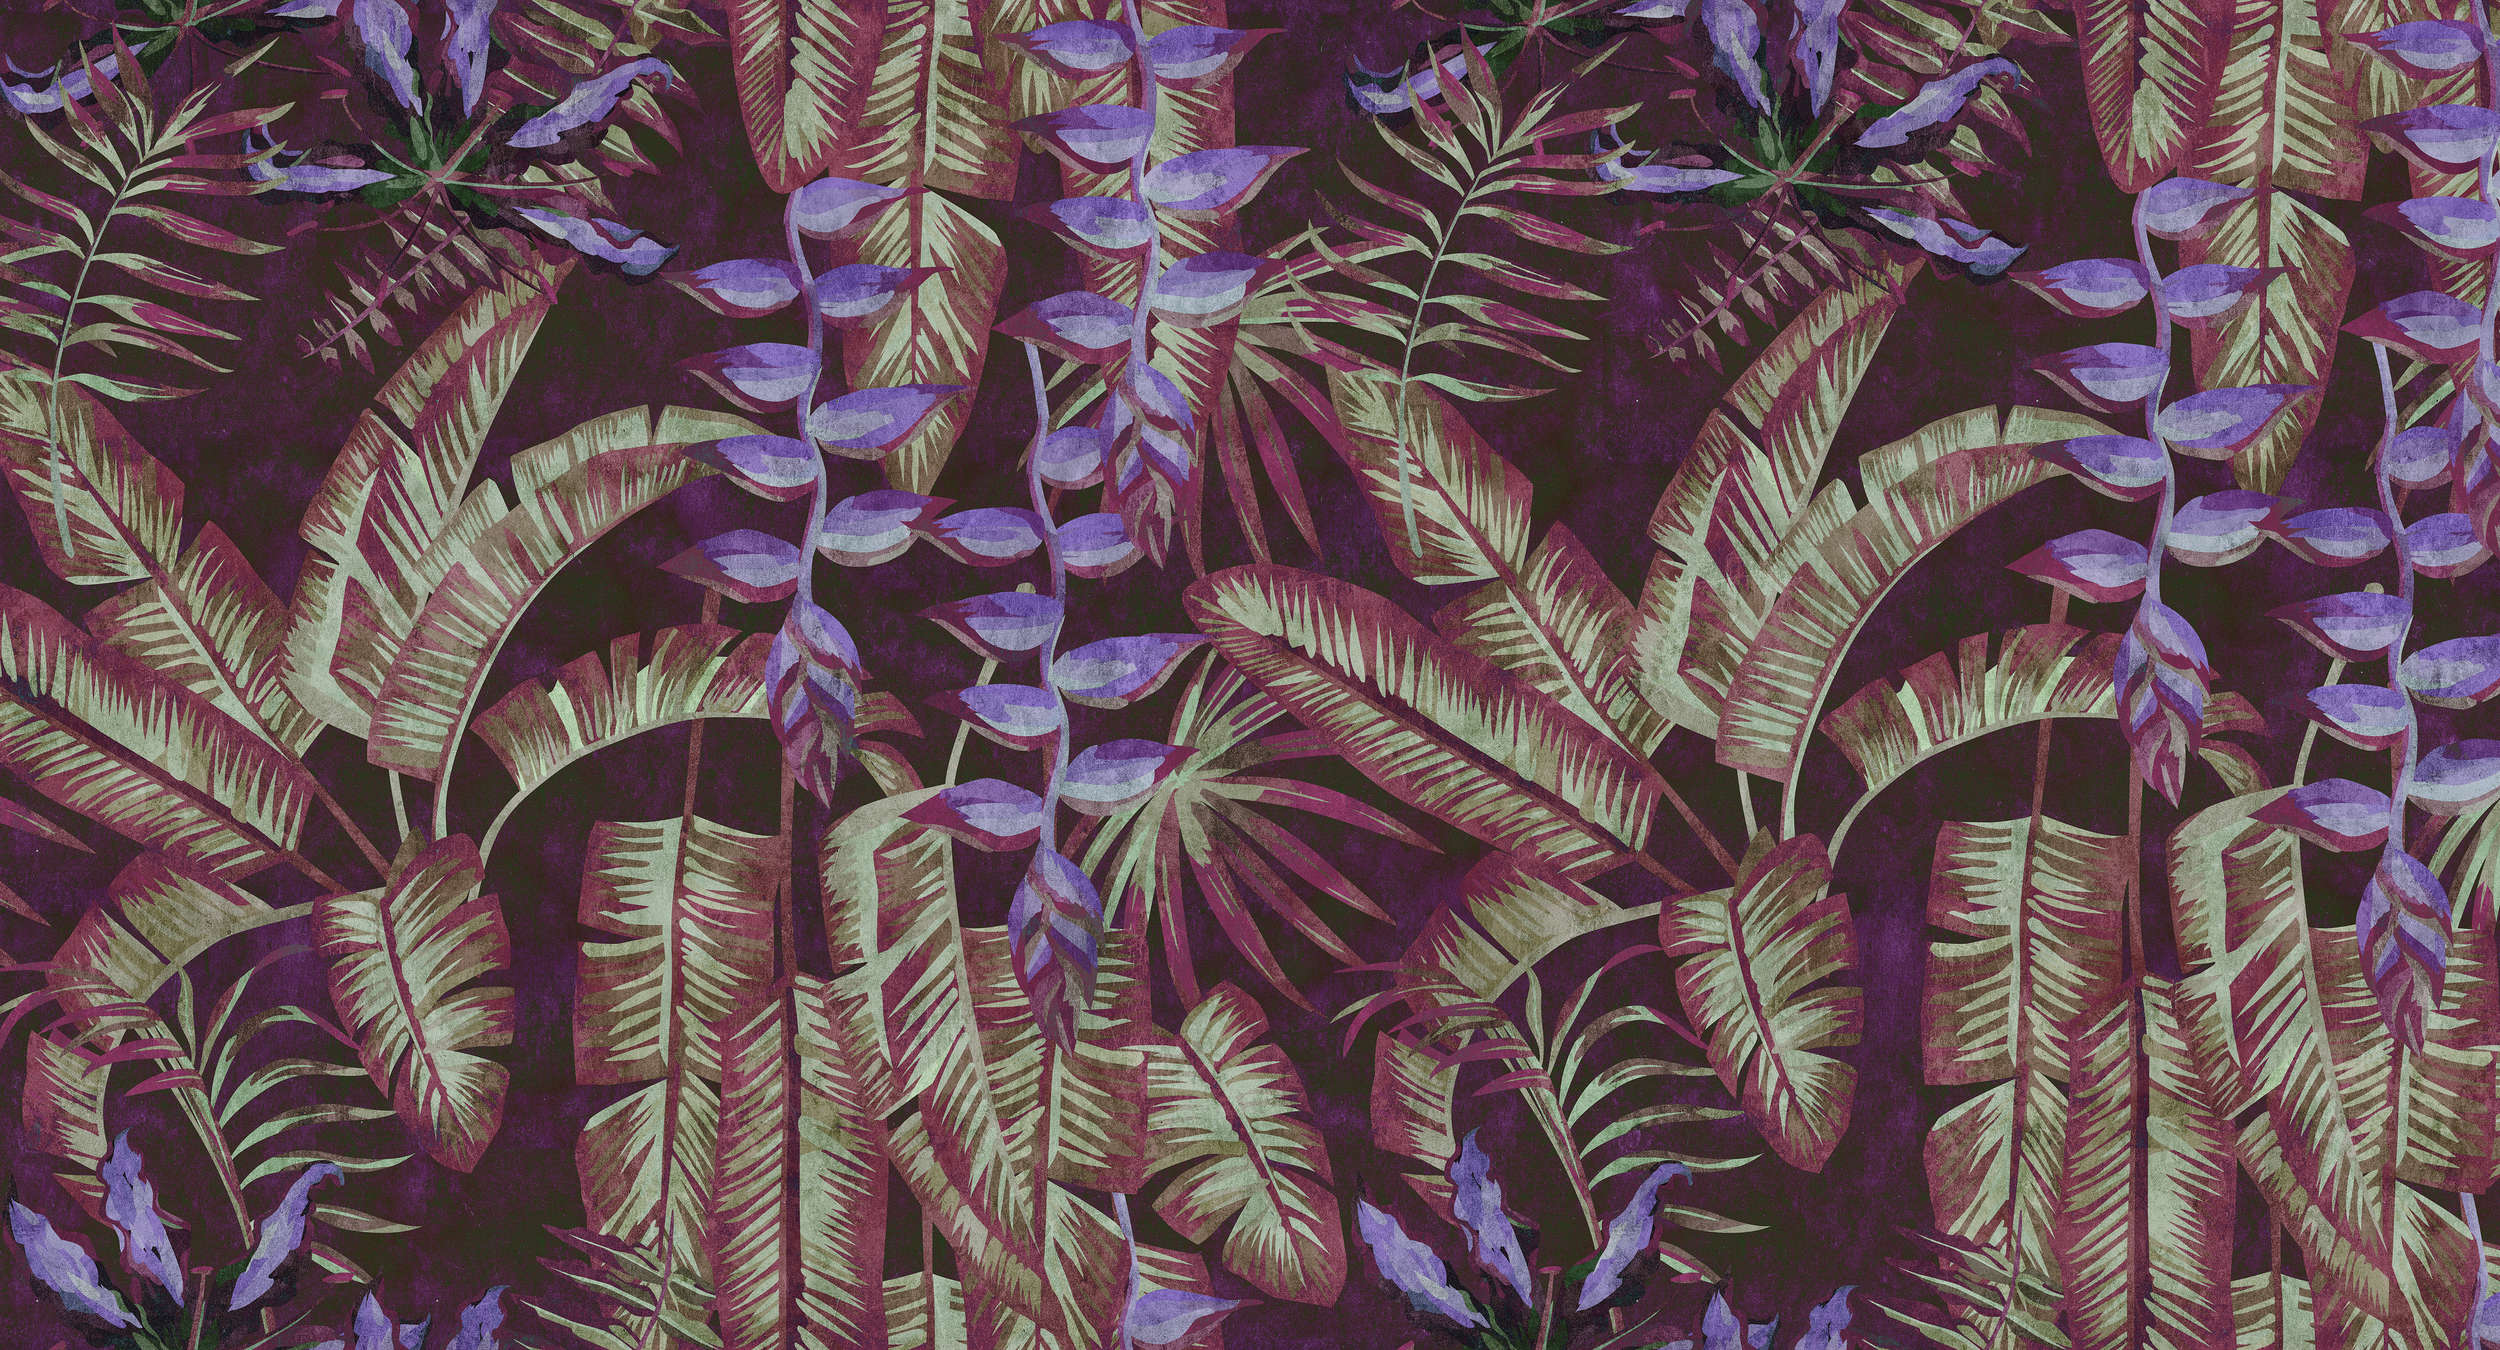             Tropicana 3 - Tropical wallpaper in blotting paper structure with leaves & ferns - Red, Purple | Pearl smooth non-woven
        